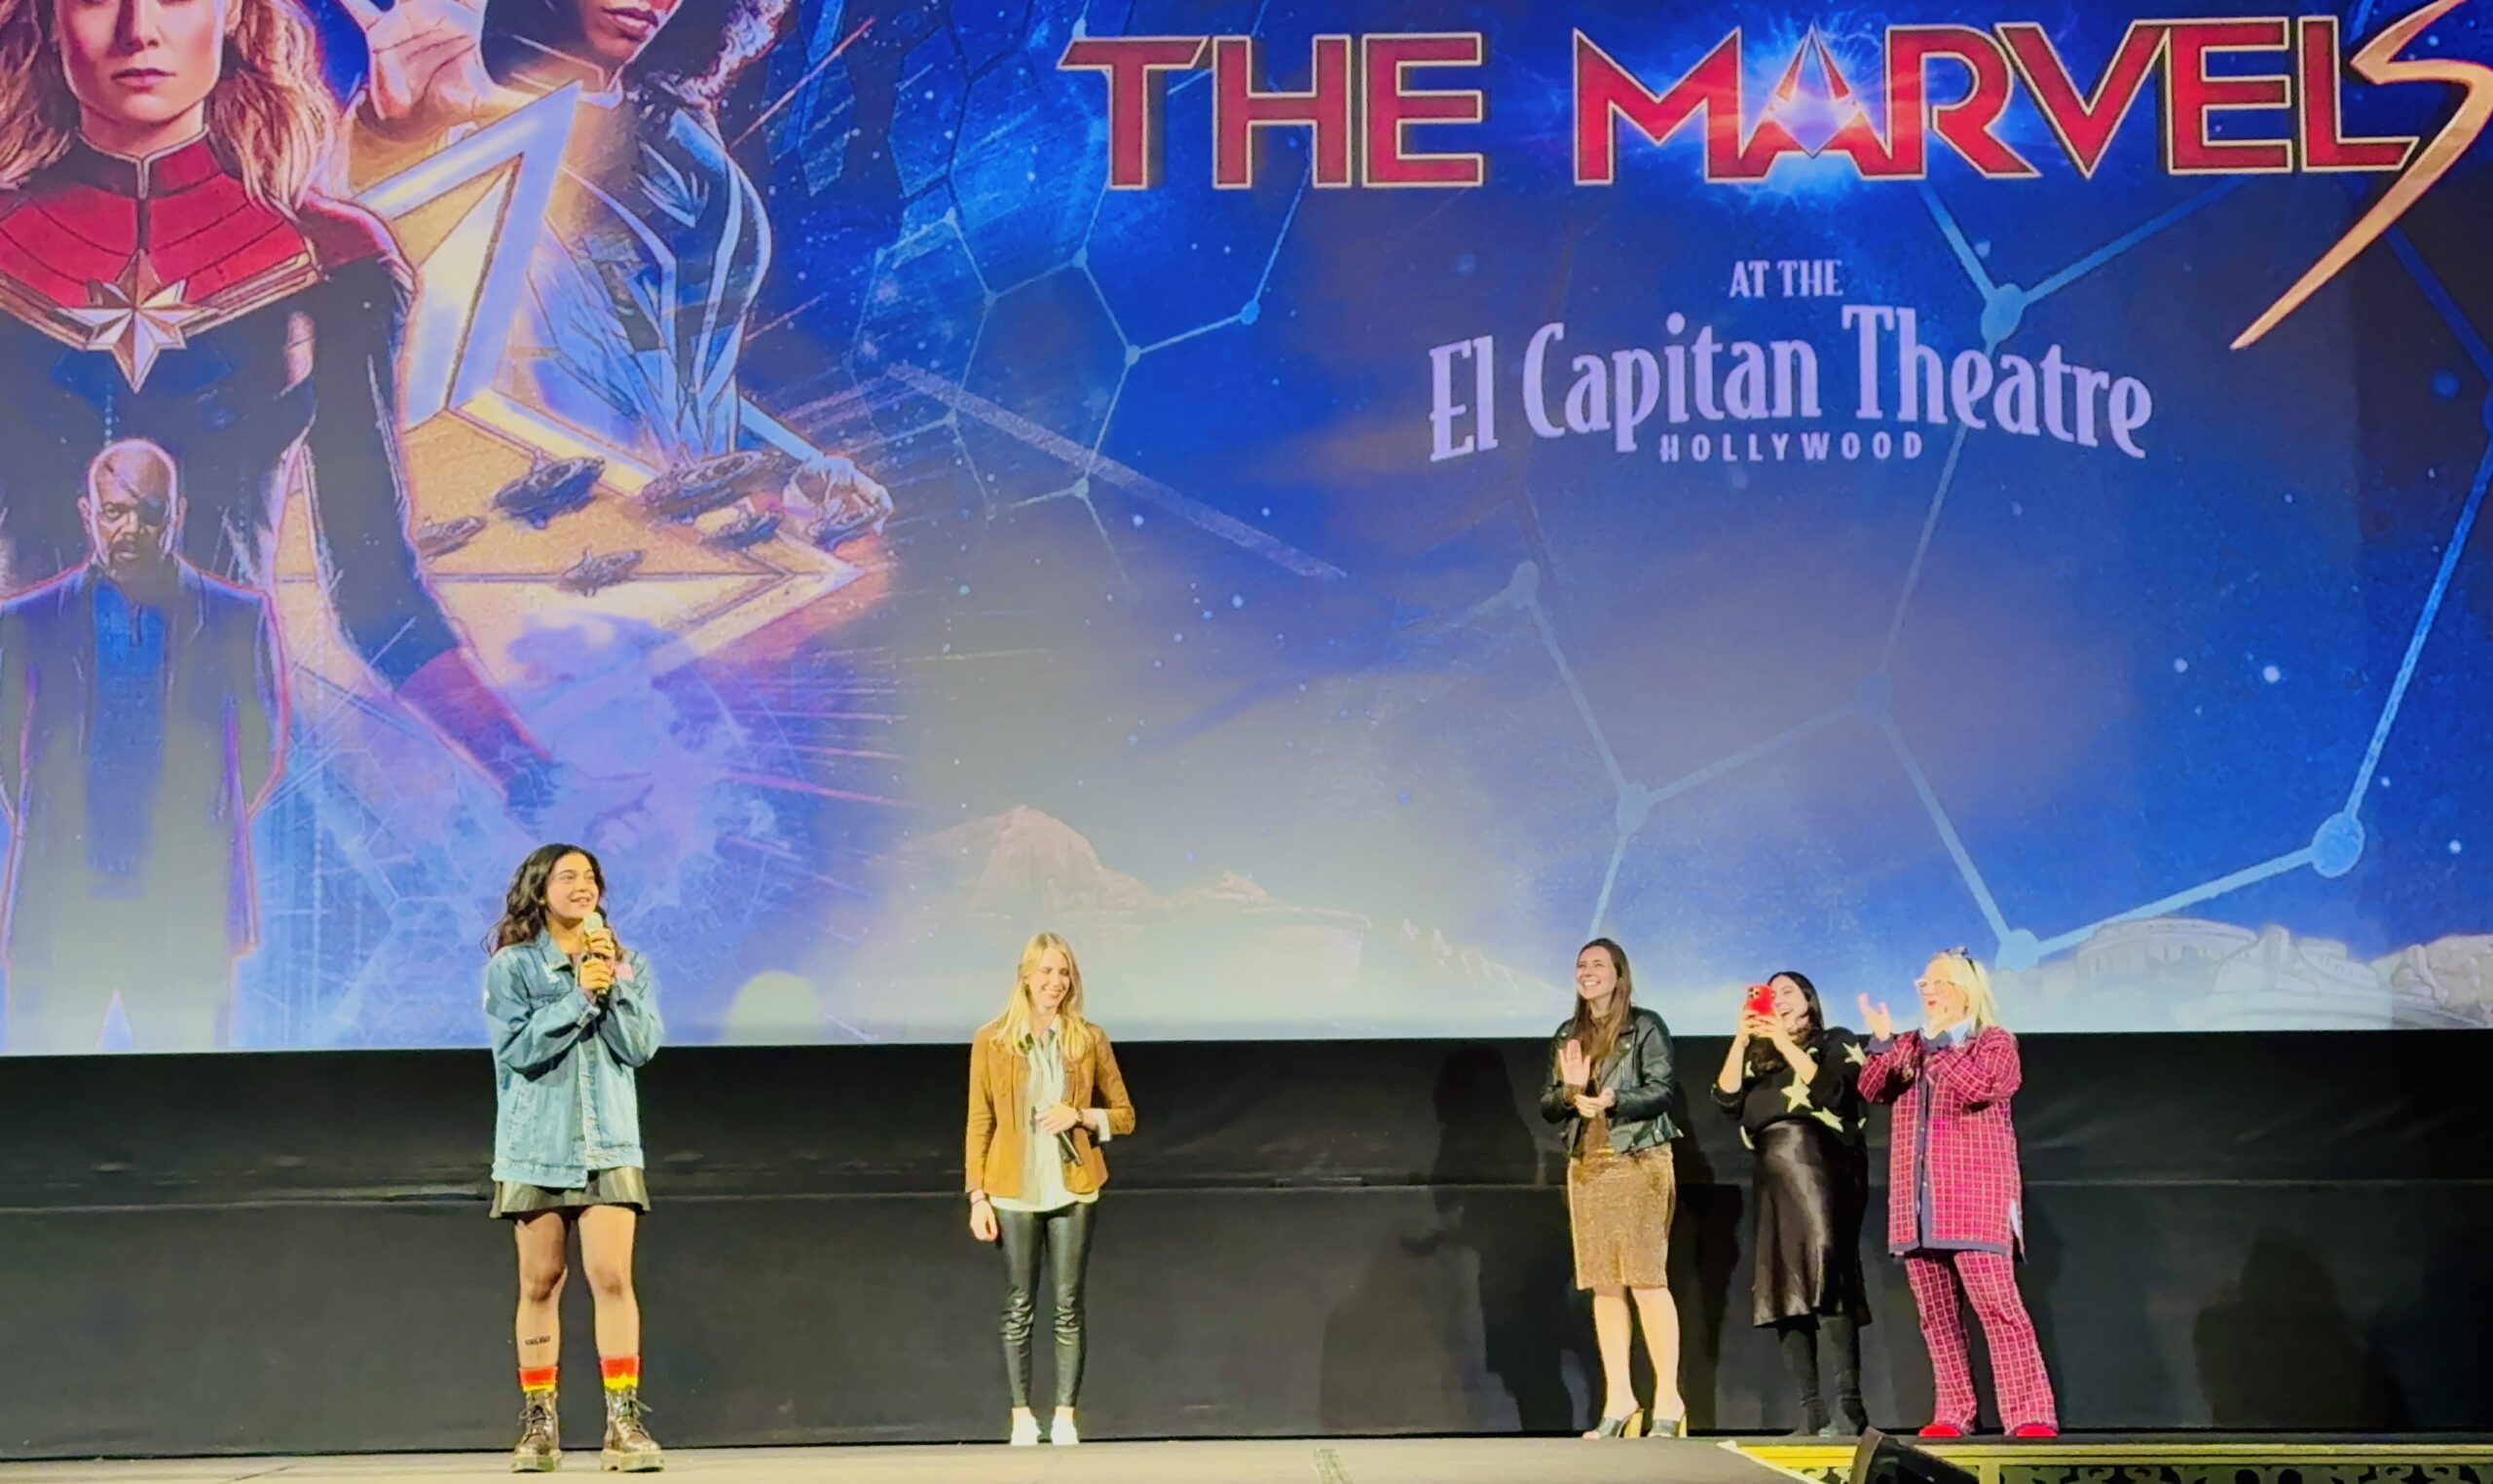 The Marvels cast and crew